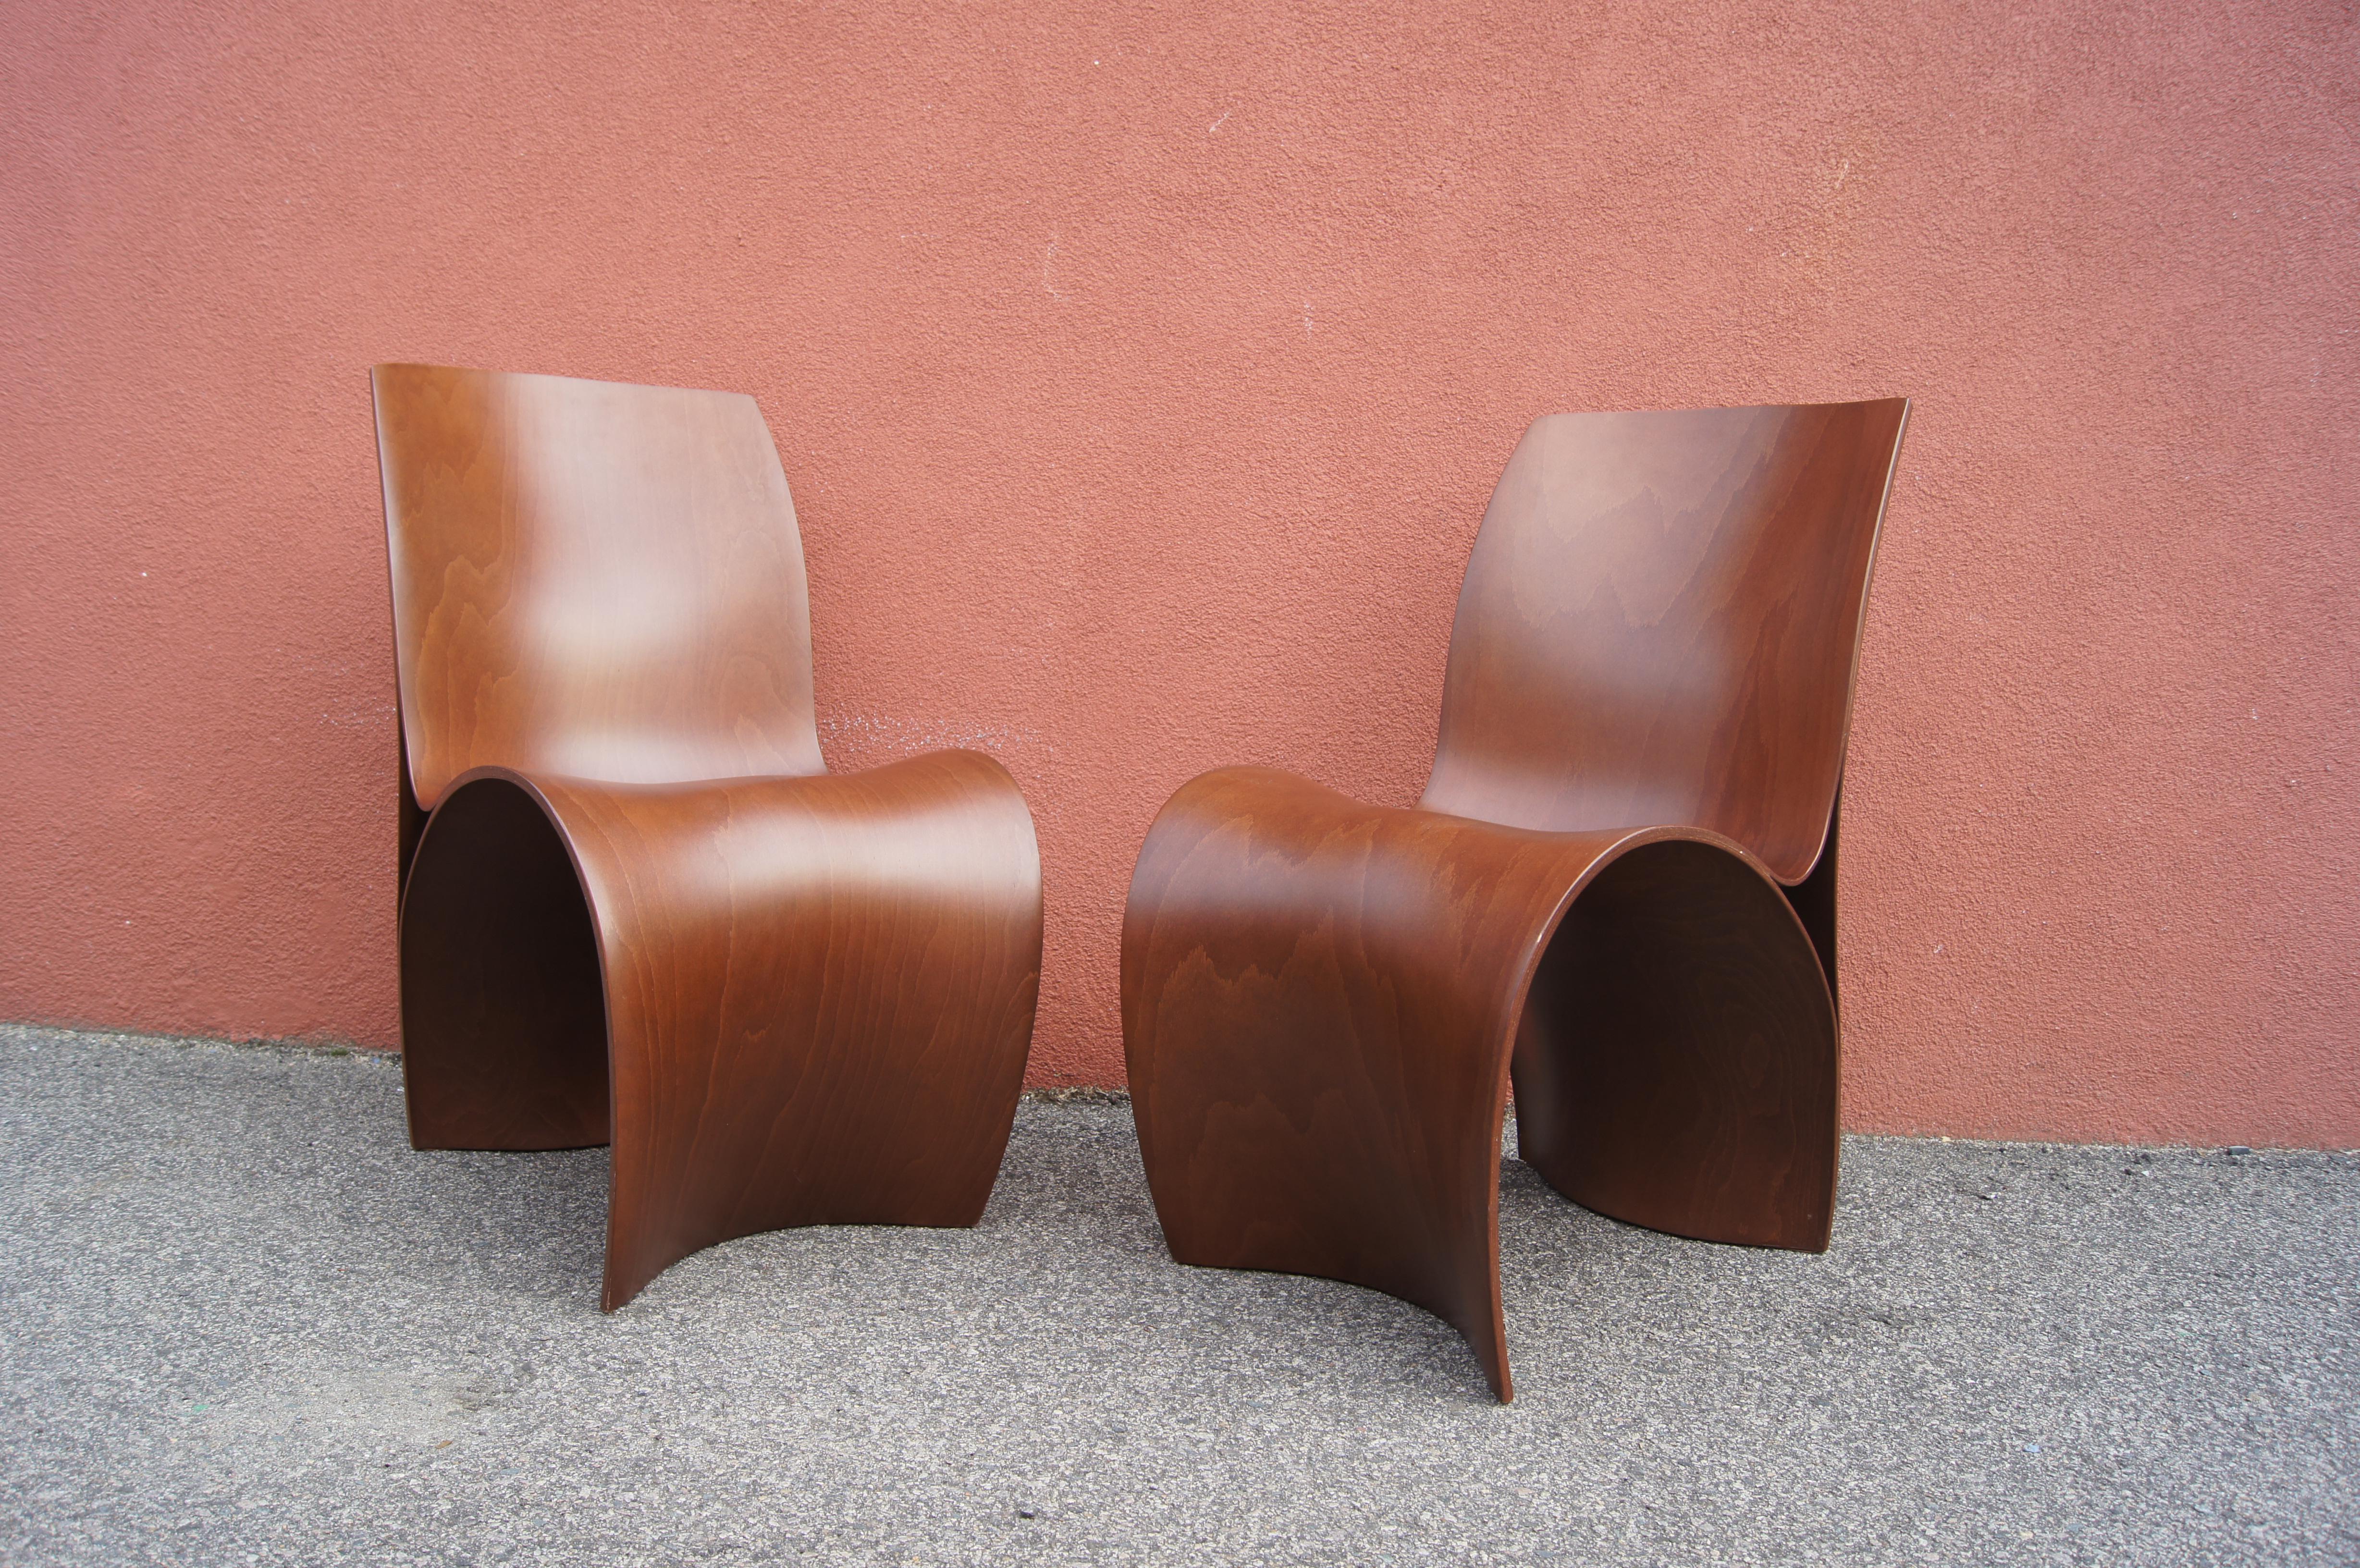 London-based Ron Arad's sinuous three skin chair for Moroso joins multiple layers of lacquered bent beech into a seat that is eye-catching from every angle. This pair are stained a rich auburn brown.